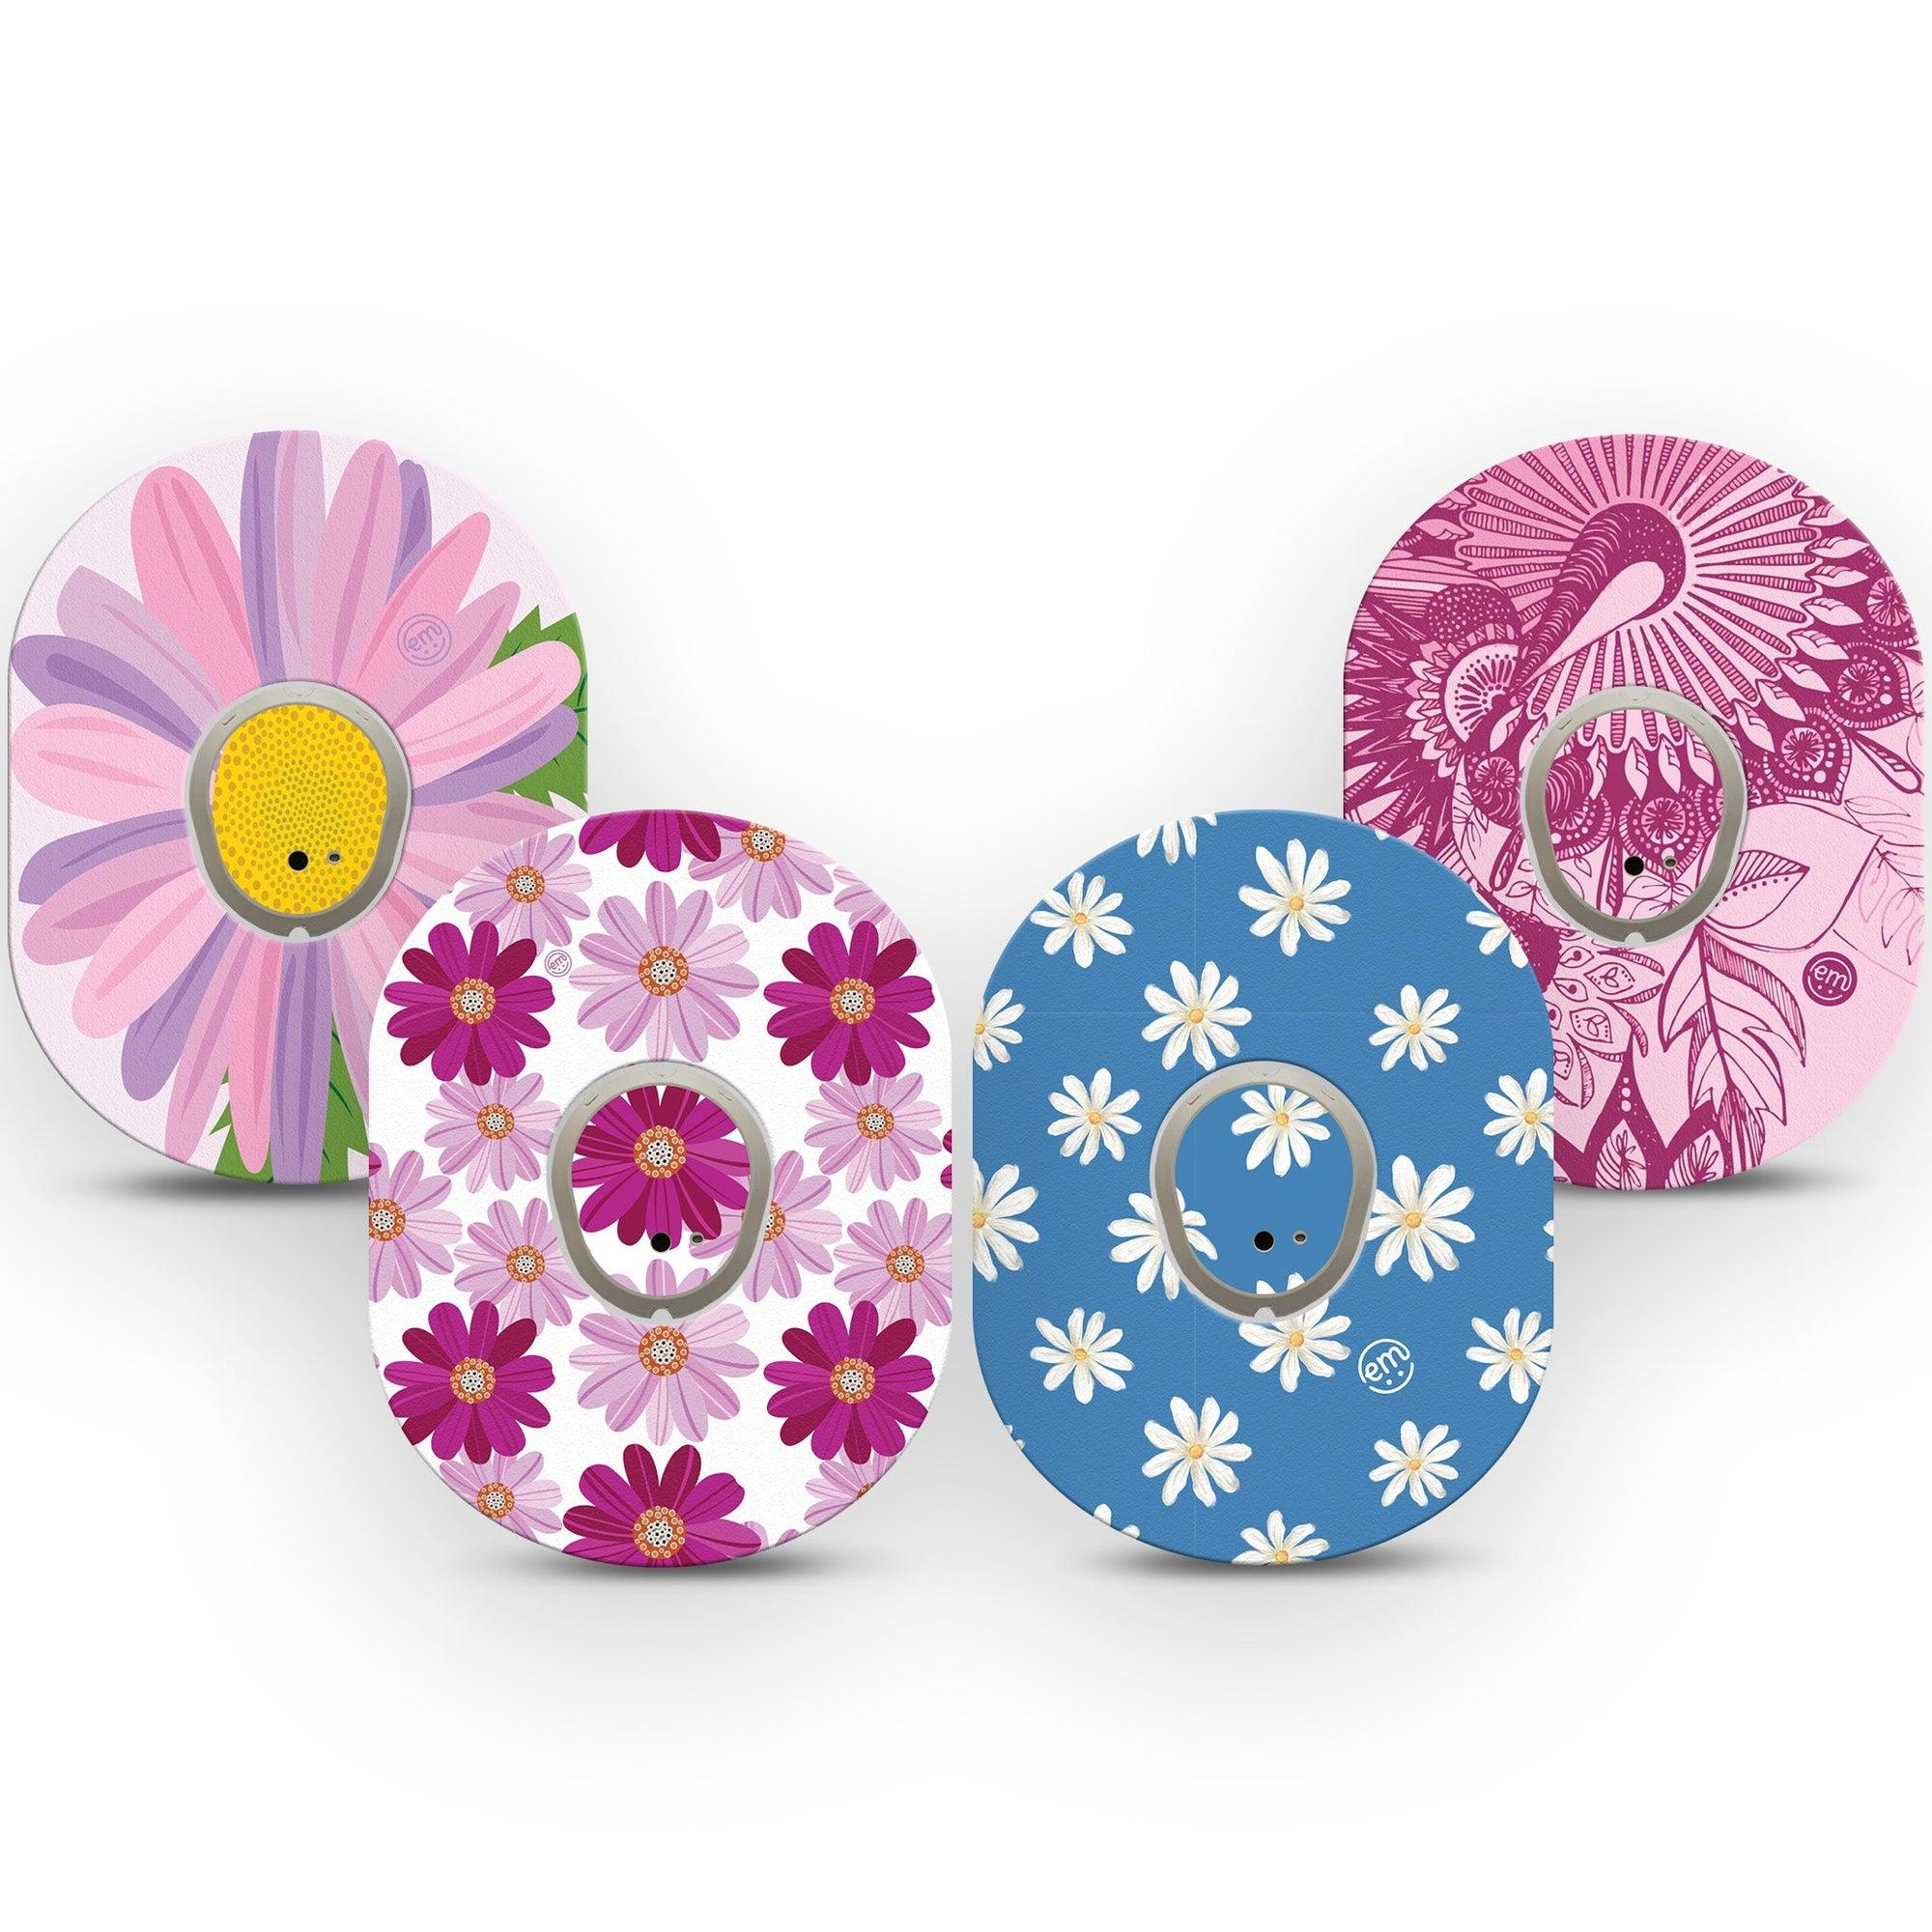 ExpressionMed Daisy Chain Variety Pack 7G Tape and Sticker, 8-Pack, Floral Bond Inspired, CGM Sticker and Tape Design